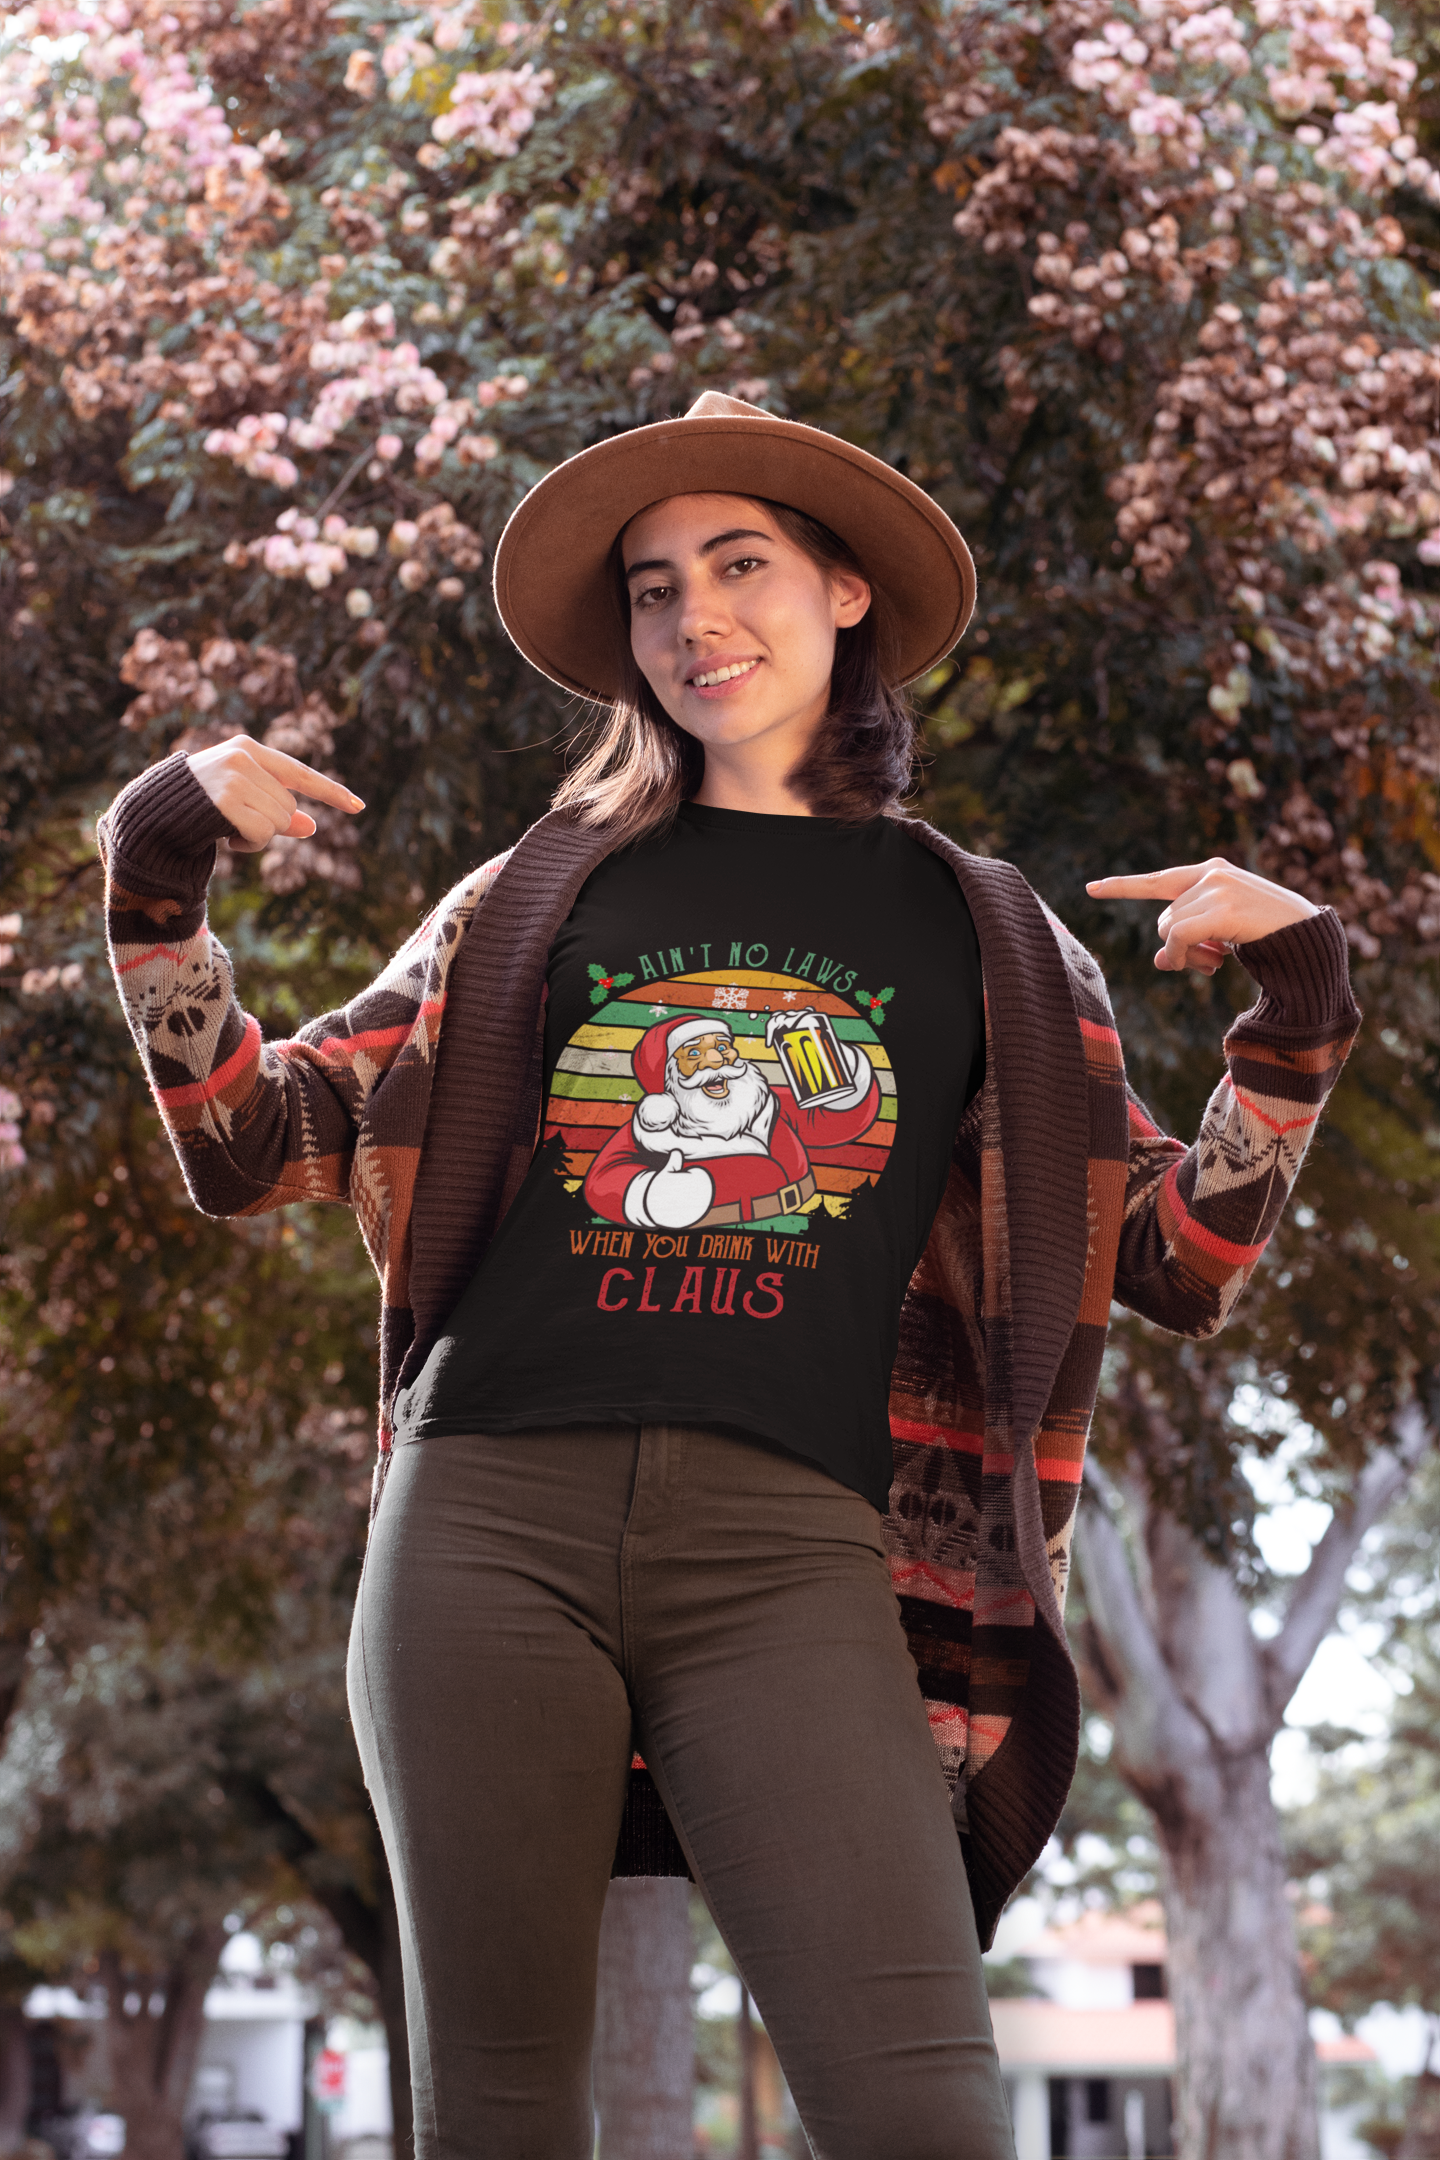 Christmas ain't no laws when you drink with claus shirt, hoodie, tank top - pdn